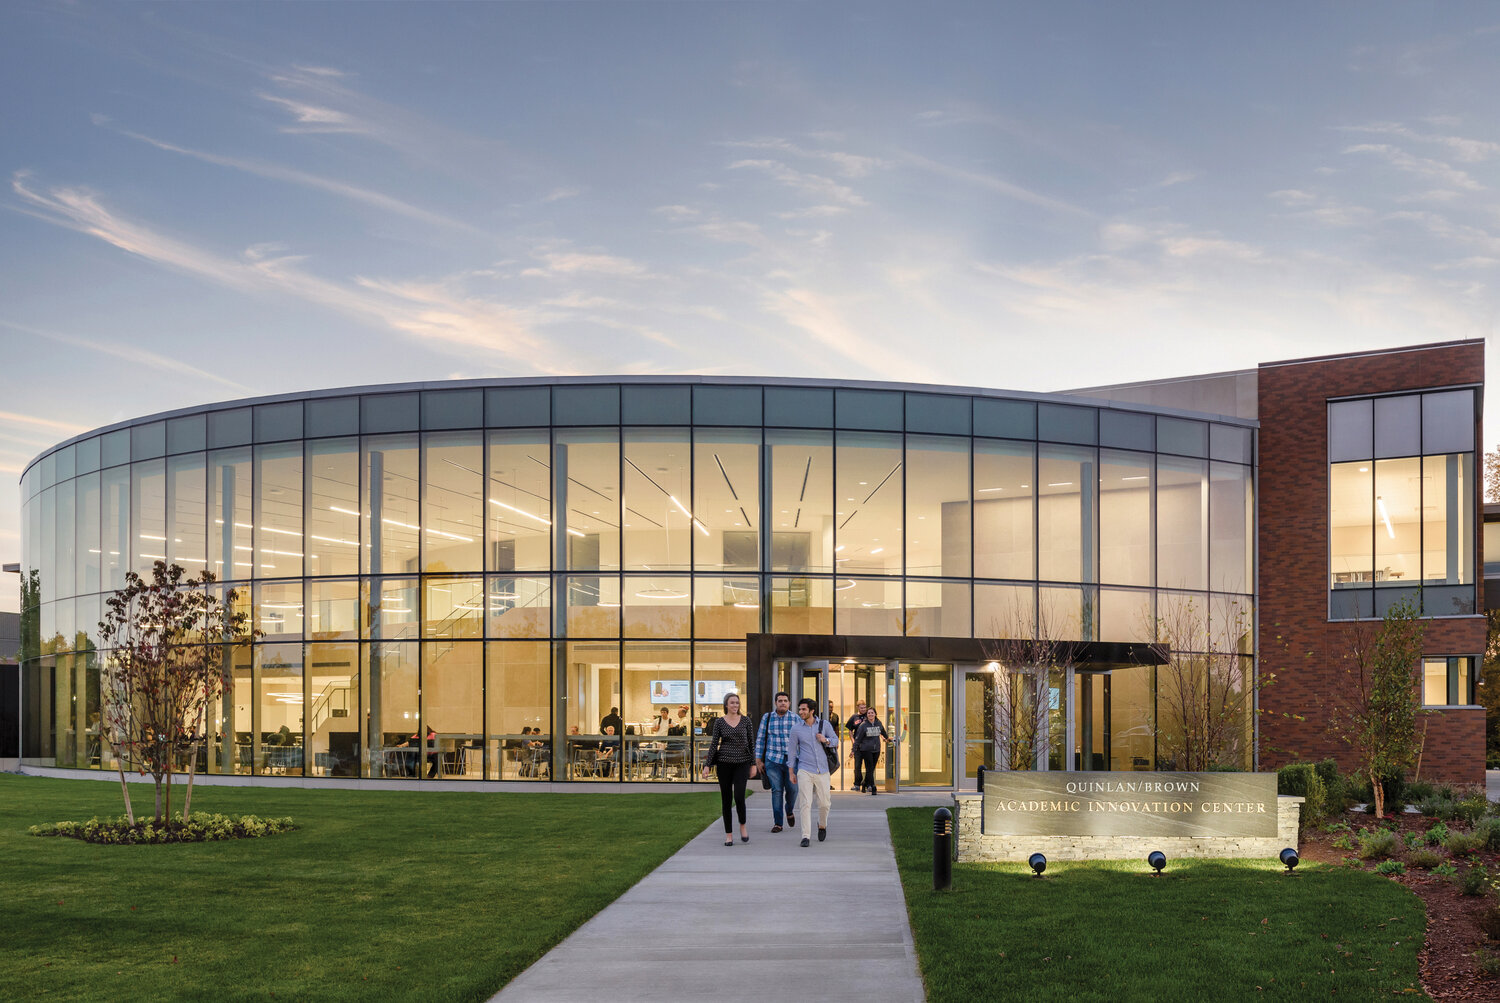 Bryant's Academic Innovation Center opened in fall of 2016